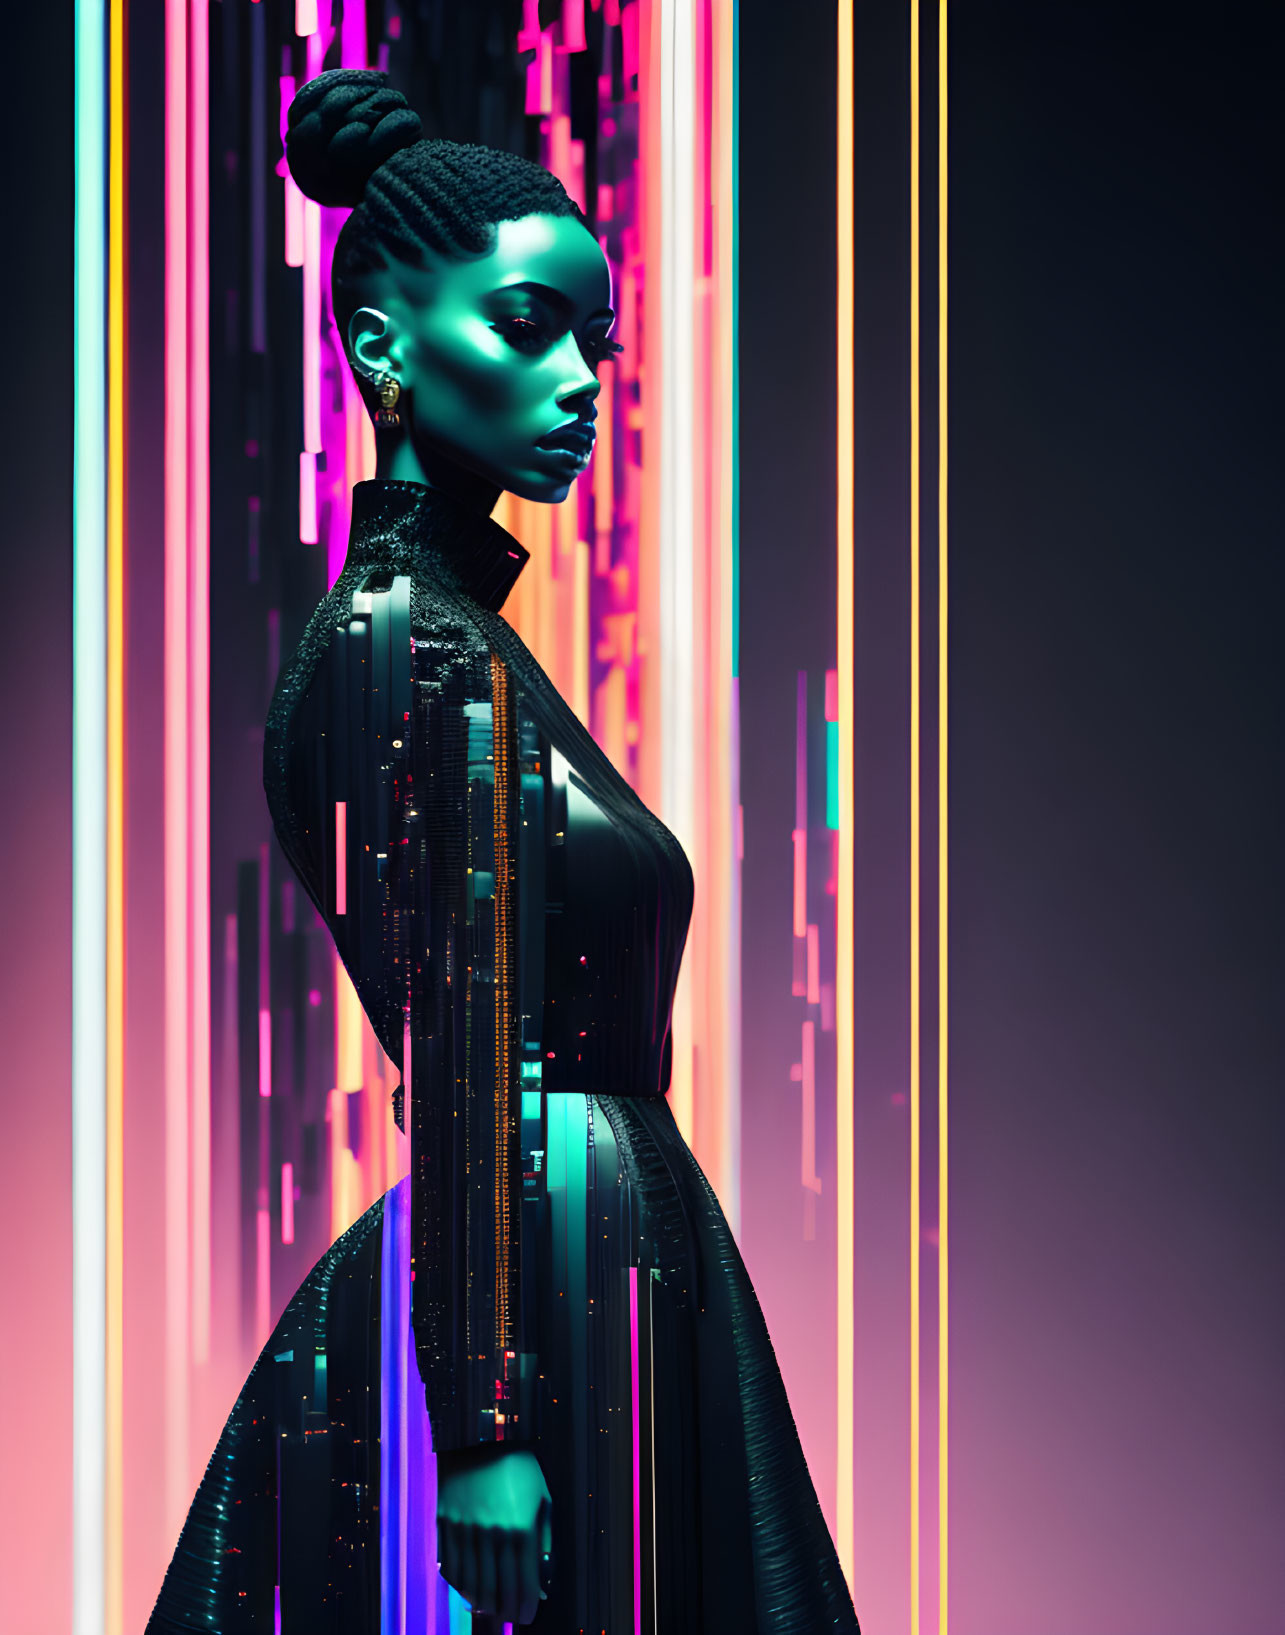 Futuristic 3D illustration of dark-skinned woman in black dress with neon-lit backdrop